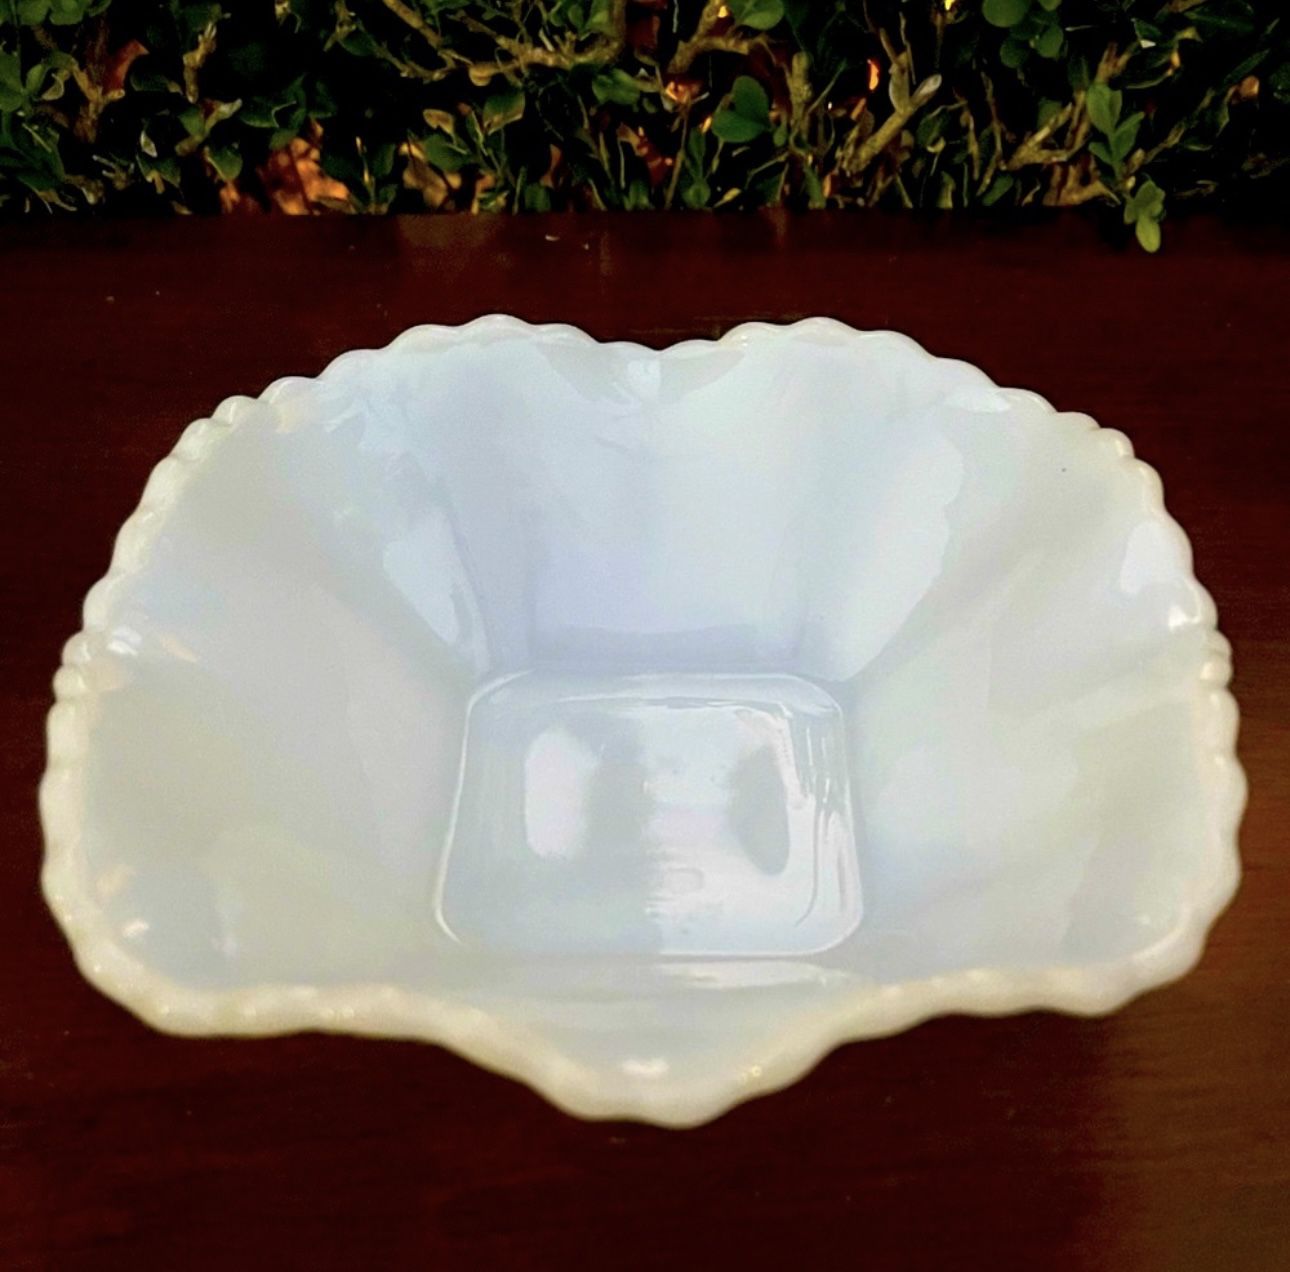 Antique White Art Milk Glass Bowl Candy Dish Original Vintage Candle Holder Fine Farm Square RUFFLED Shabby Chic Country Estate Cabin Lodge